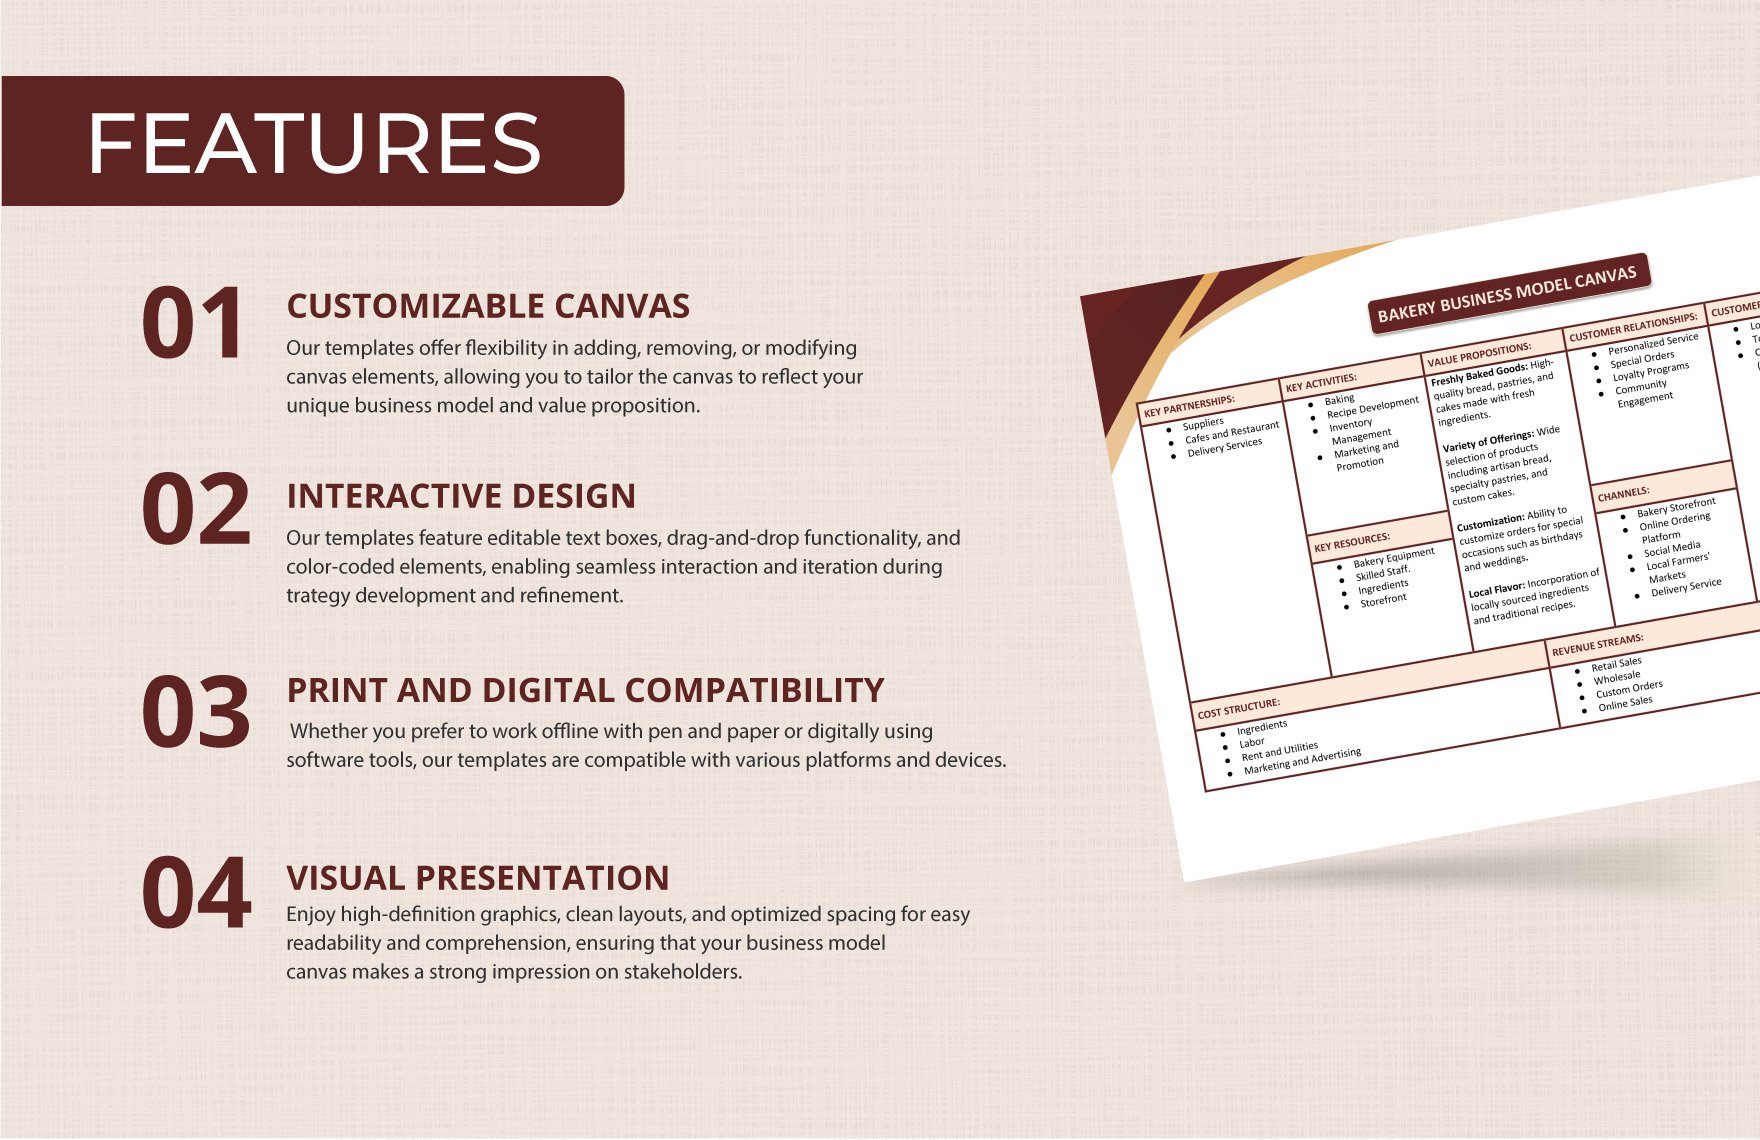 Bakery Business Model Canvas Template